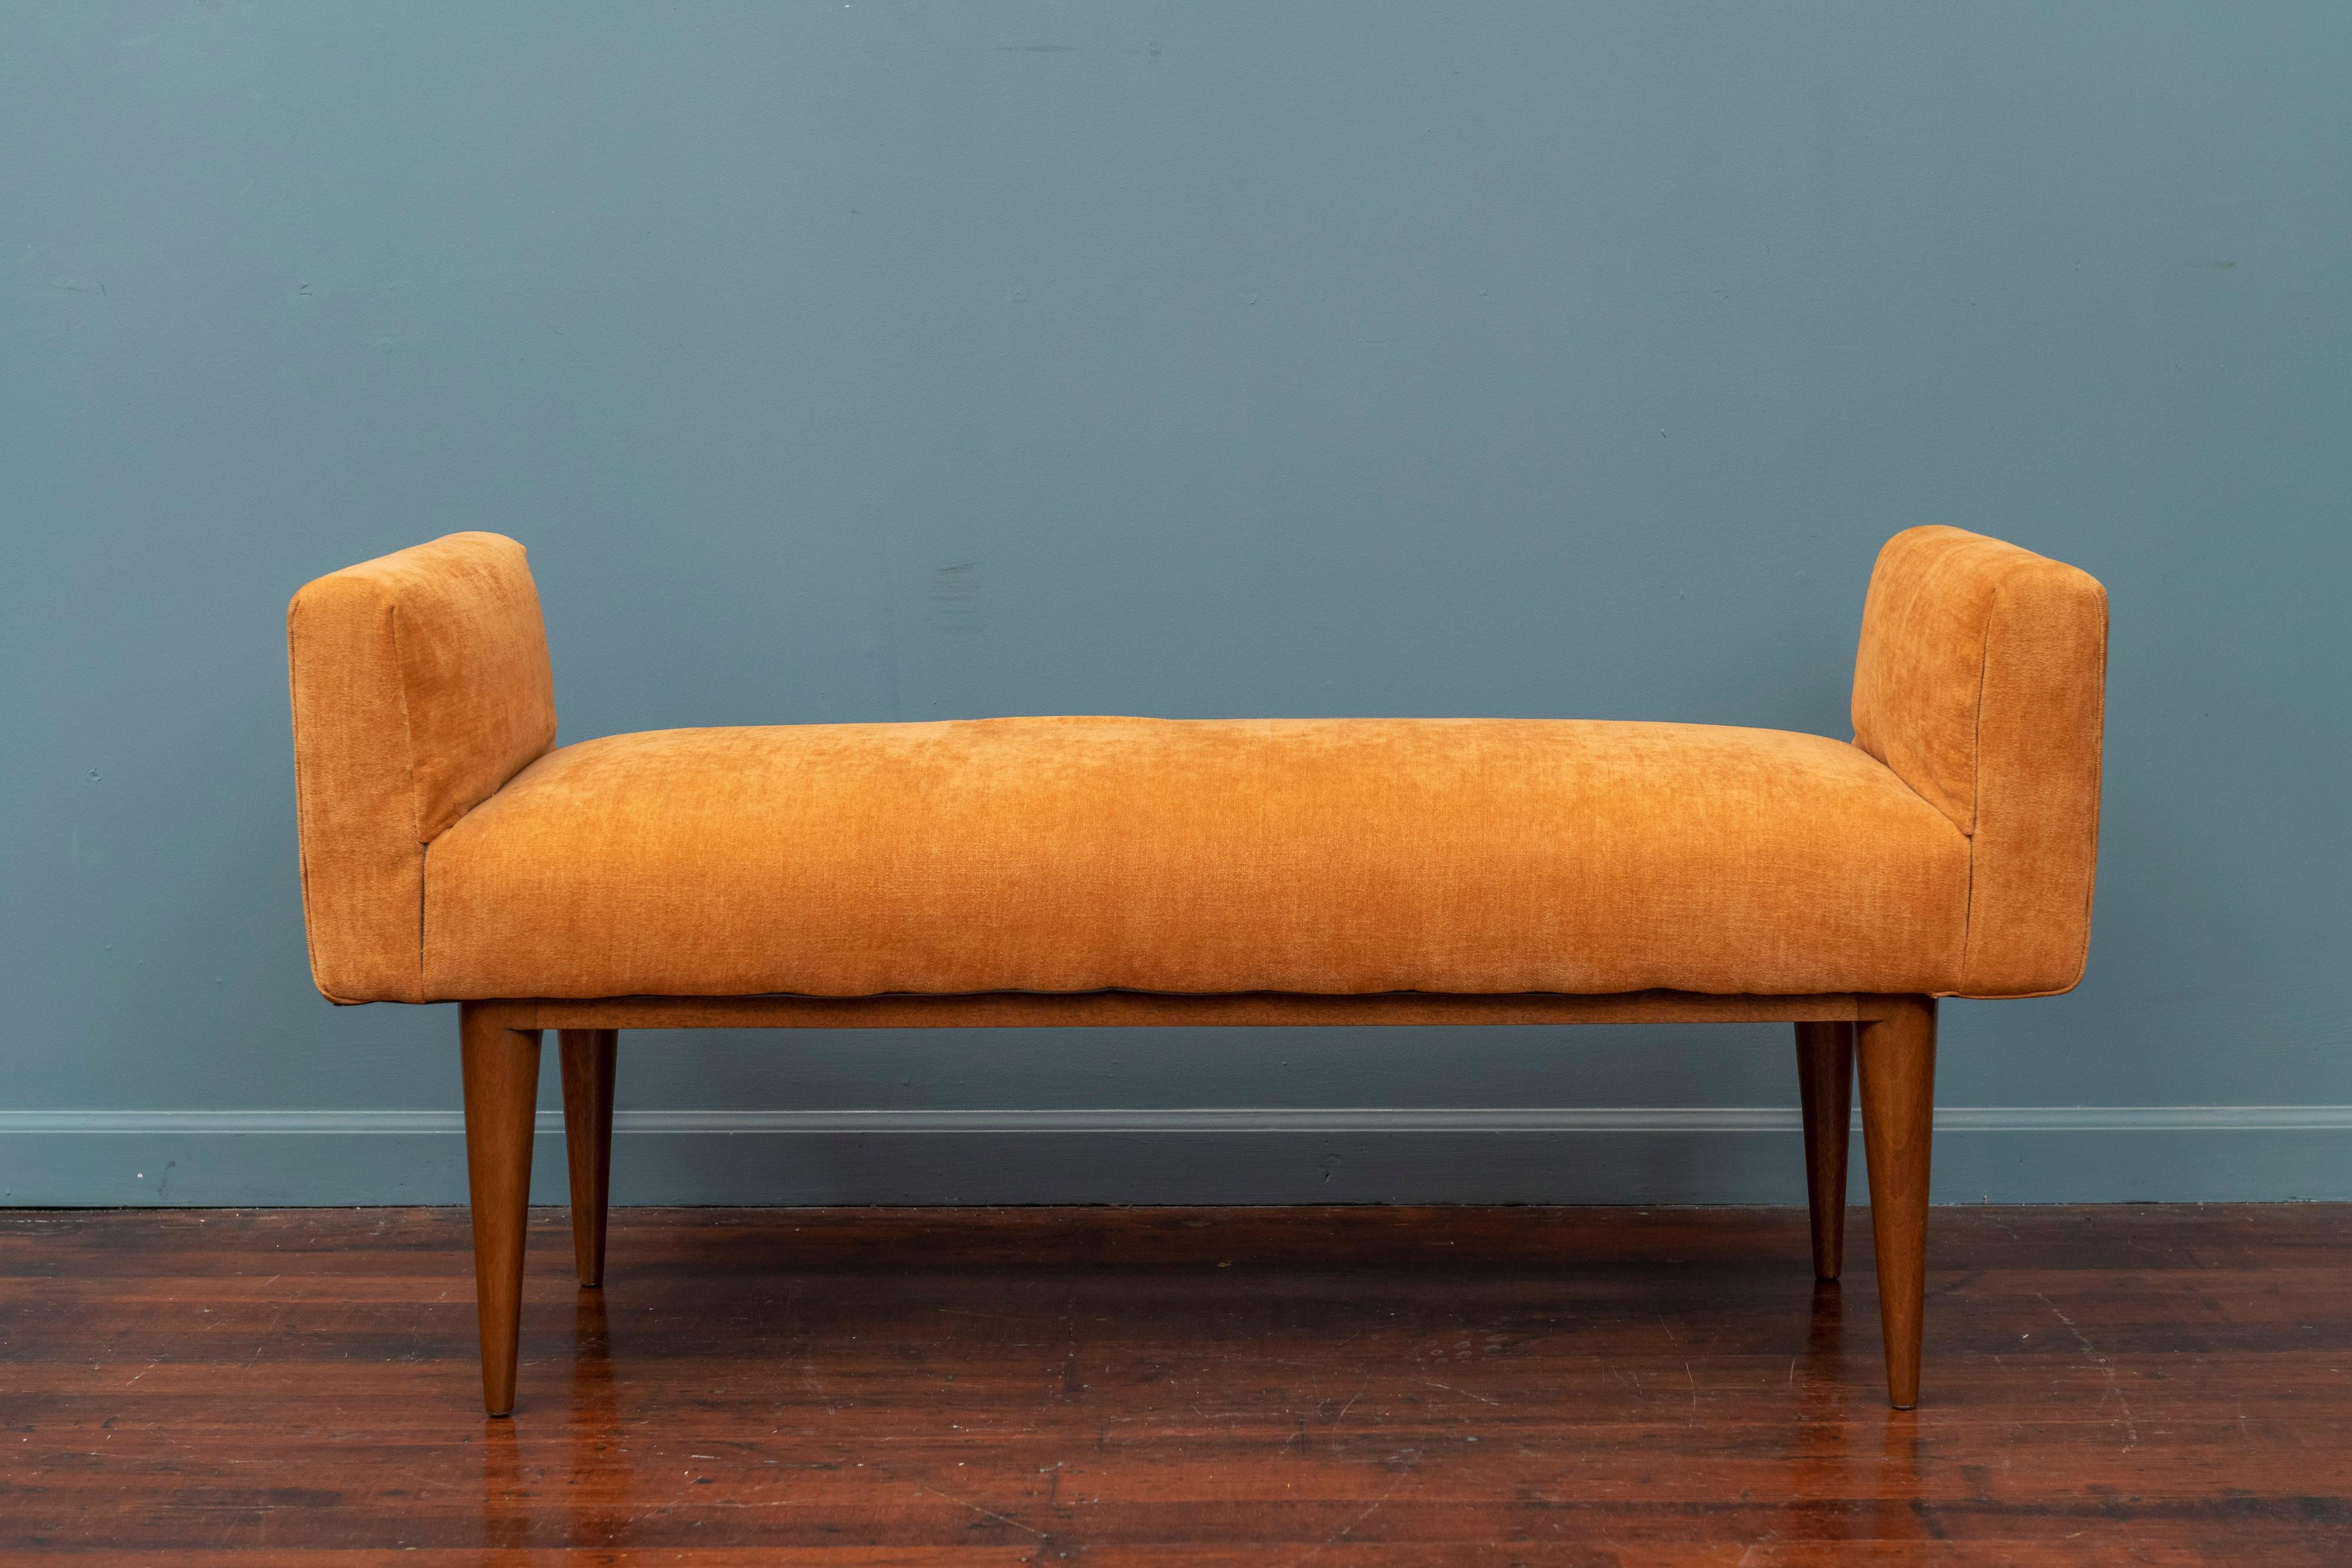 Edward Wormley design upholstered bench for Dunbar Furniture Co. The rounded tapering leg mahogany base has been newly refinished and is ready for your choice of upholstery or usable as-is. This is the perfect foot of the bed or entry way bench to